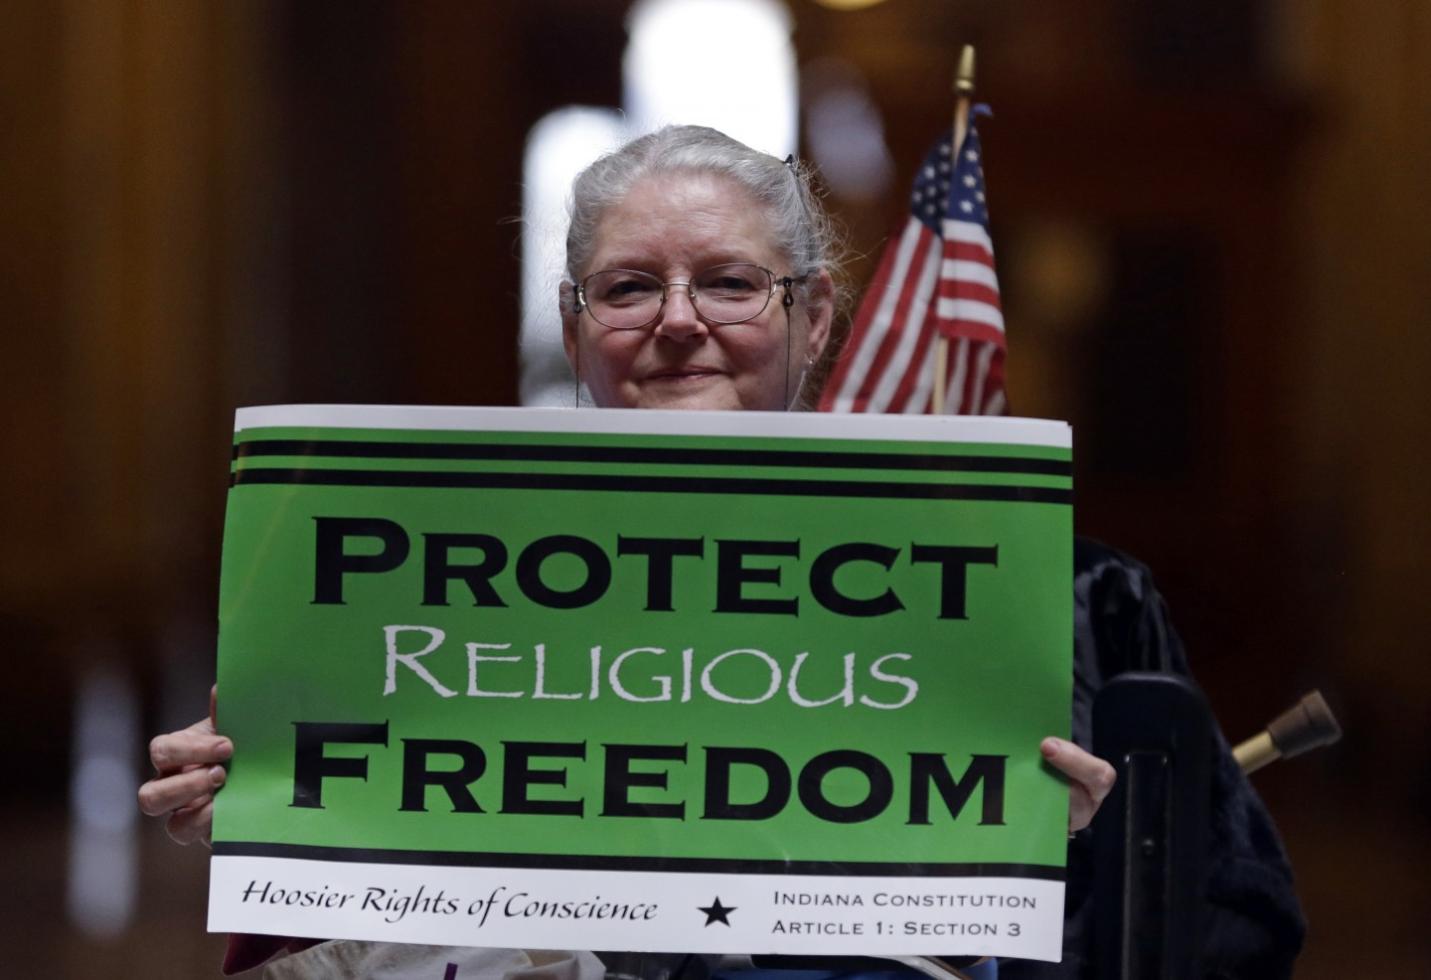 How Can Individuals and Organizations Support Religious Freedom?